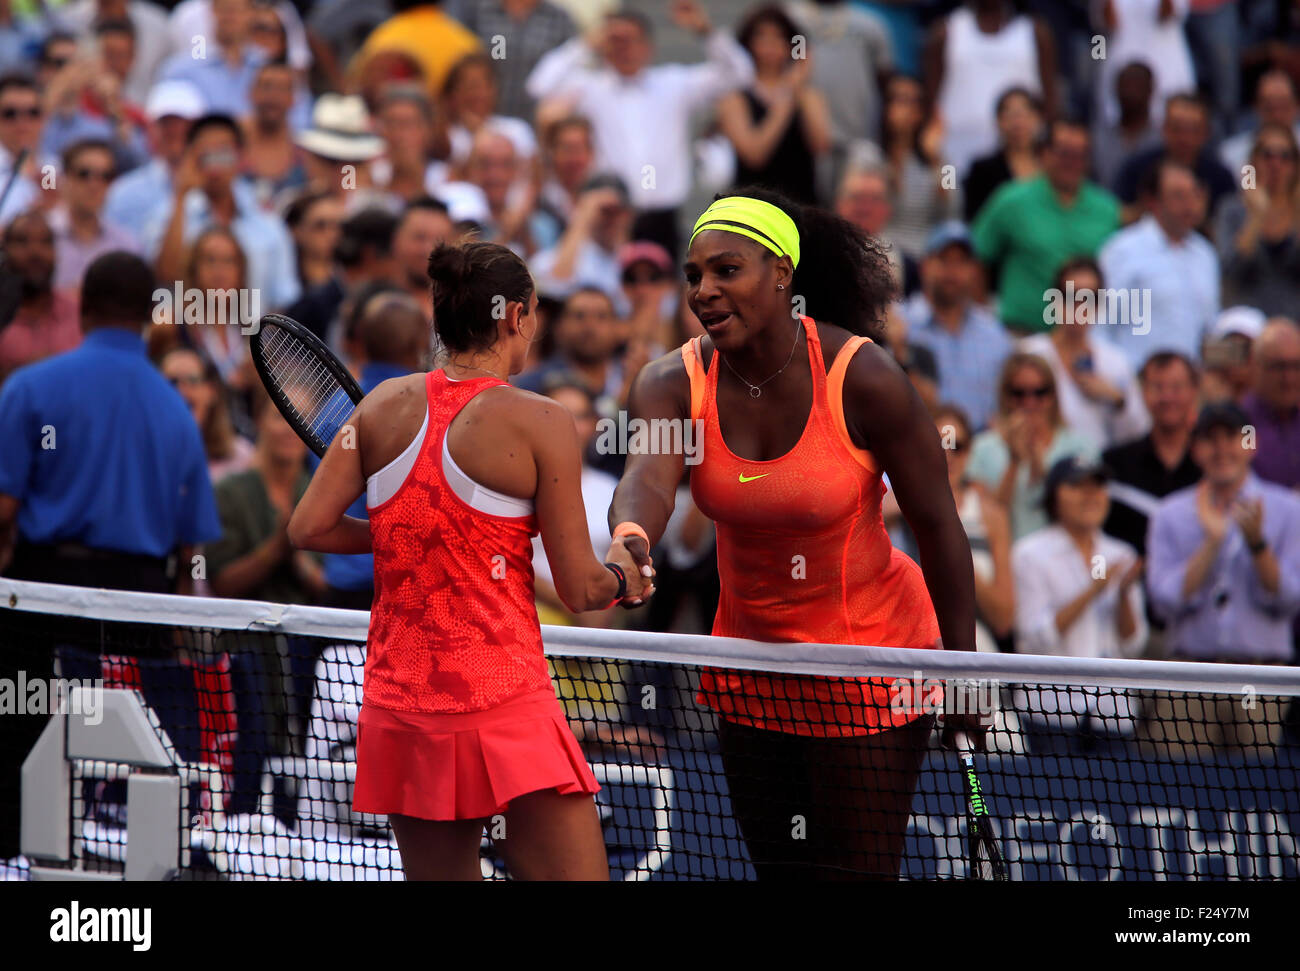 Flushing Meadows, New York, USA. 11th Sep, 2015. Roberta Vinci of Italy shakes hands with Serena Williams after defeating Williams in their semifinal match at the U.S. Open in Flushing Meadows, New York on the afternoon of September 11th, 2015.  Vinci won the match 2-6, 6-4, 6-4. Credit:  Adam Stoltman/Alamy Live News Stock Photo